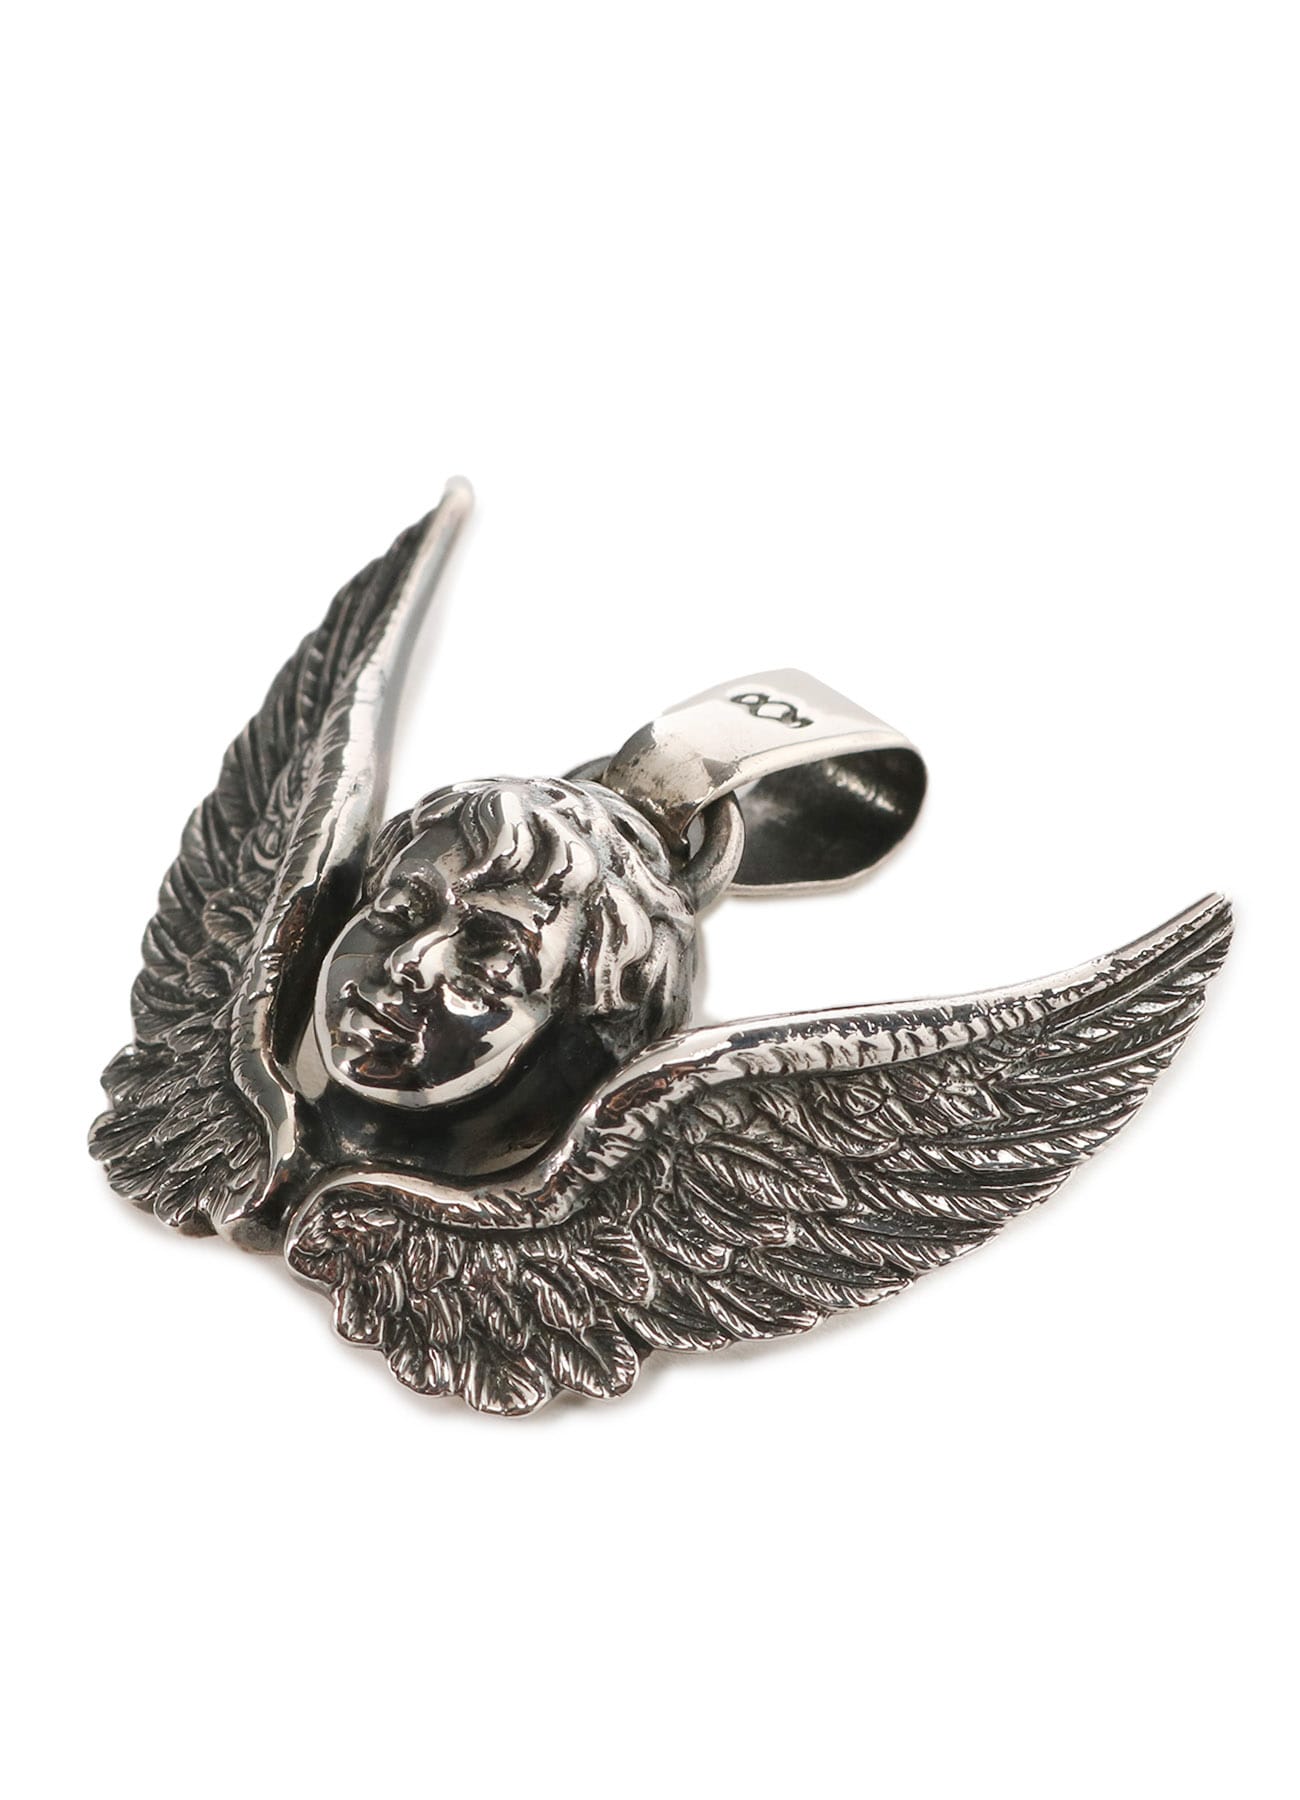 SILVER 950 DEATH ANGEL PENDANTHEAD(FREE SIZE Silver): GOTHIC